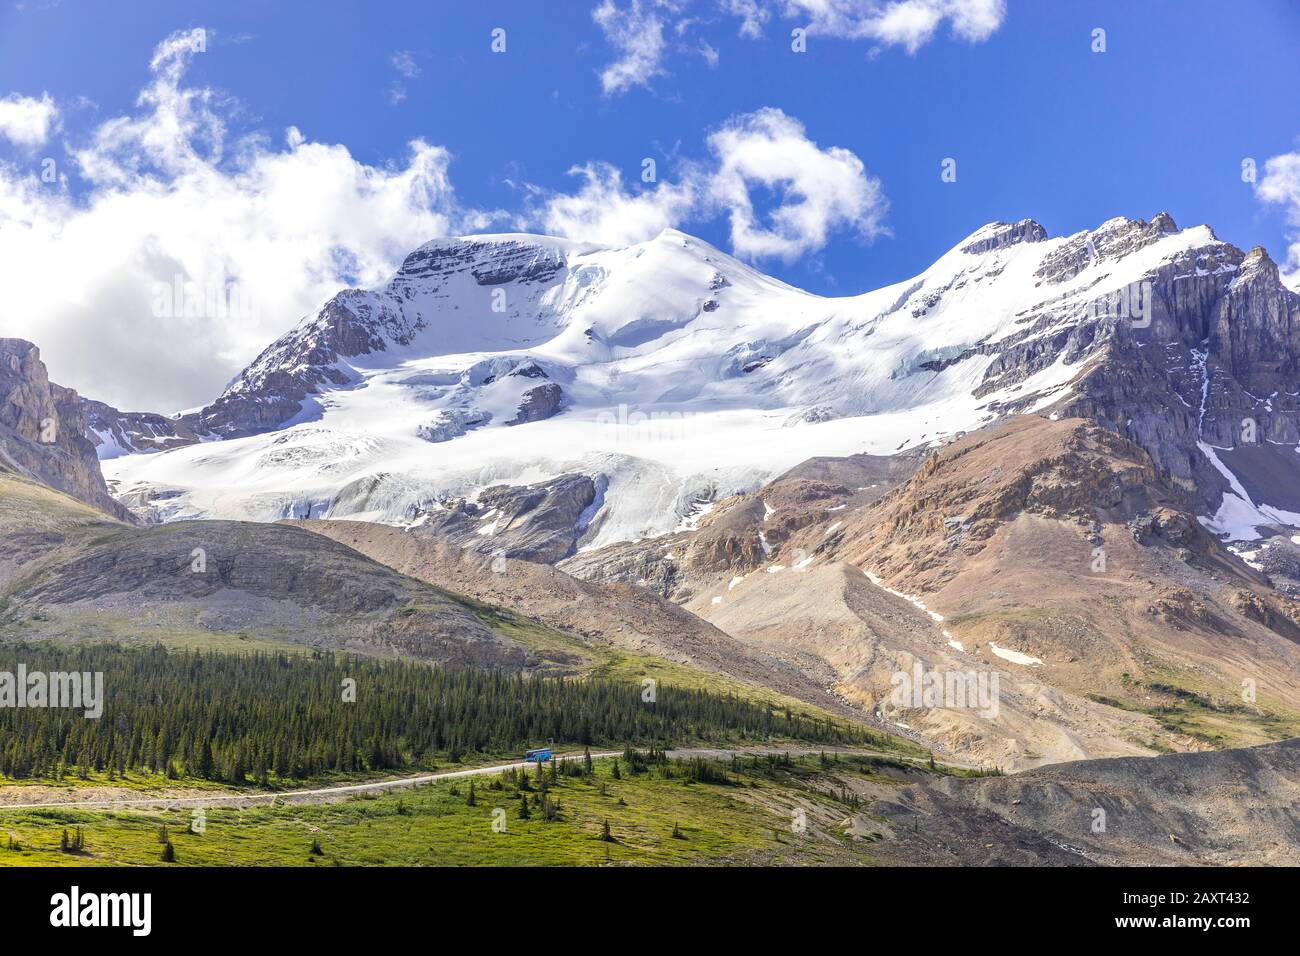 View of Mount Athabasca and Mount Andromeda with glaciers in summer time at Icefileds Parkway, Alberta, Canada Stock Photo